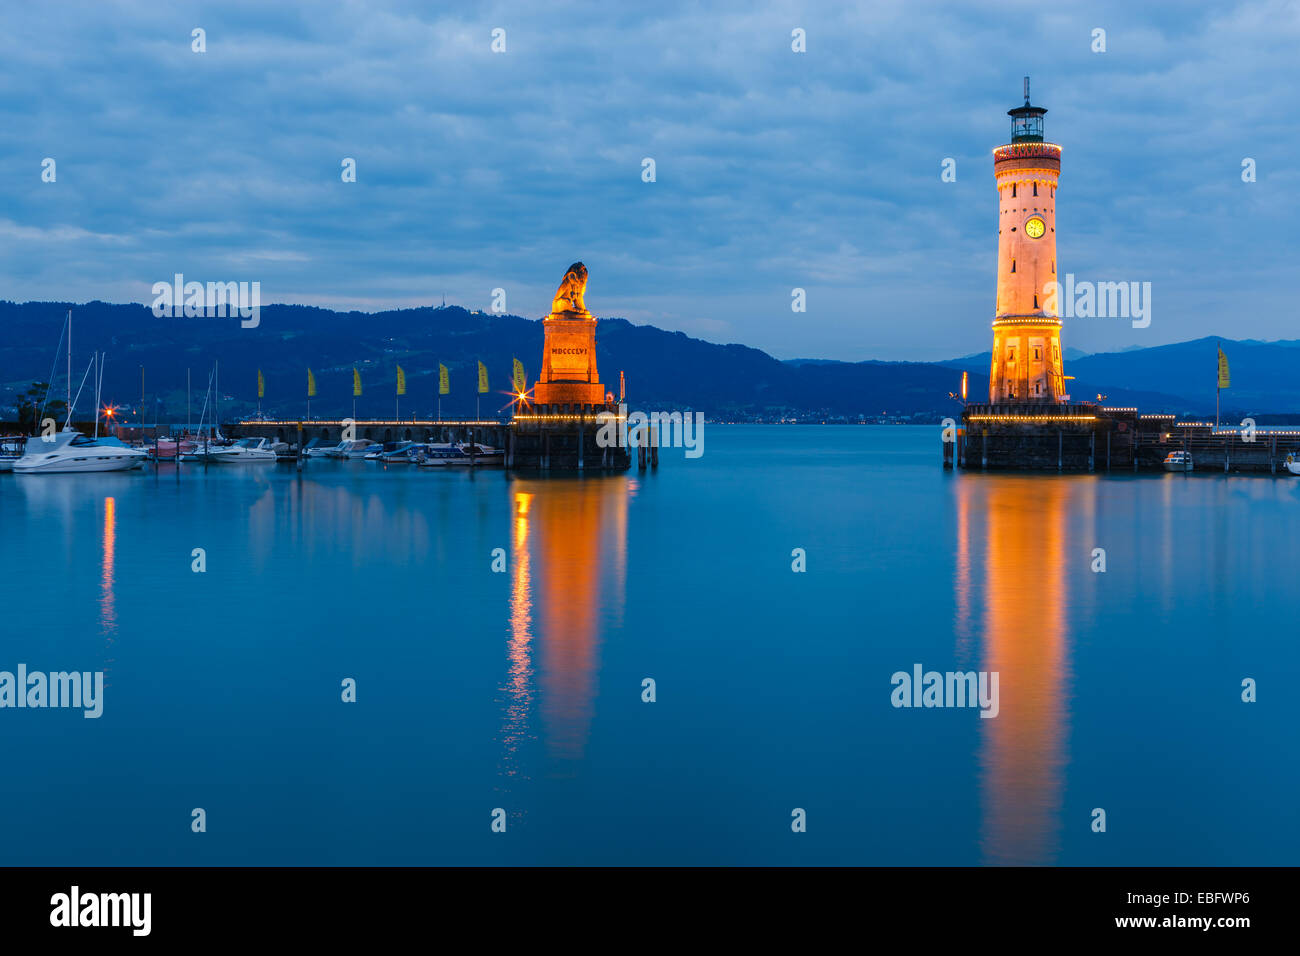 View of harbor entrance and lighthouse at night in Lindau at lake Constance, Bavaria, Germany Stock Photo